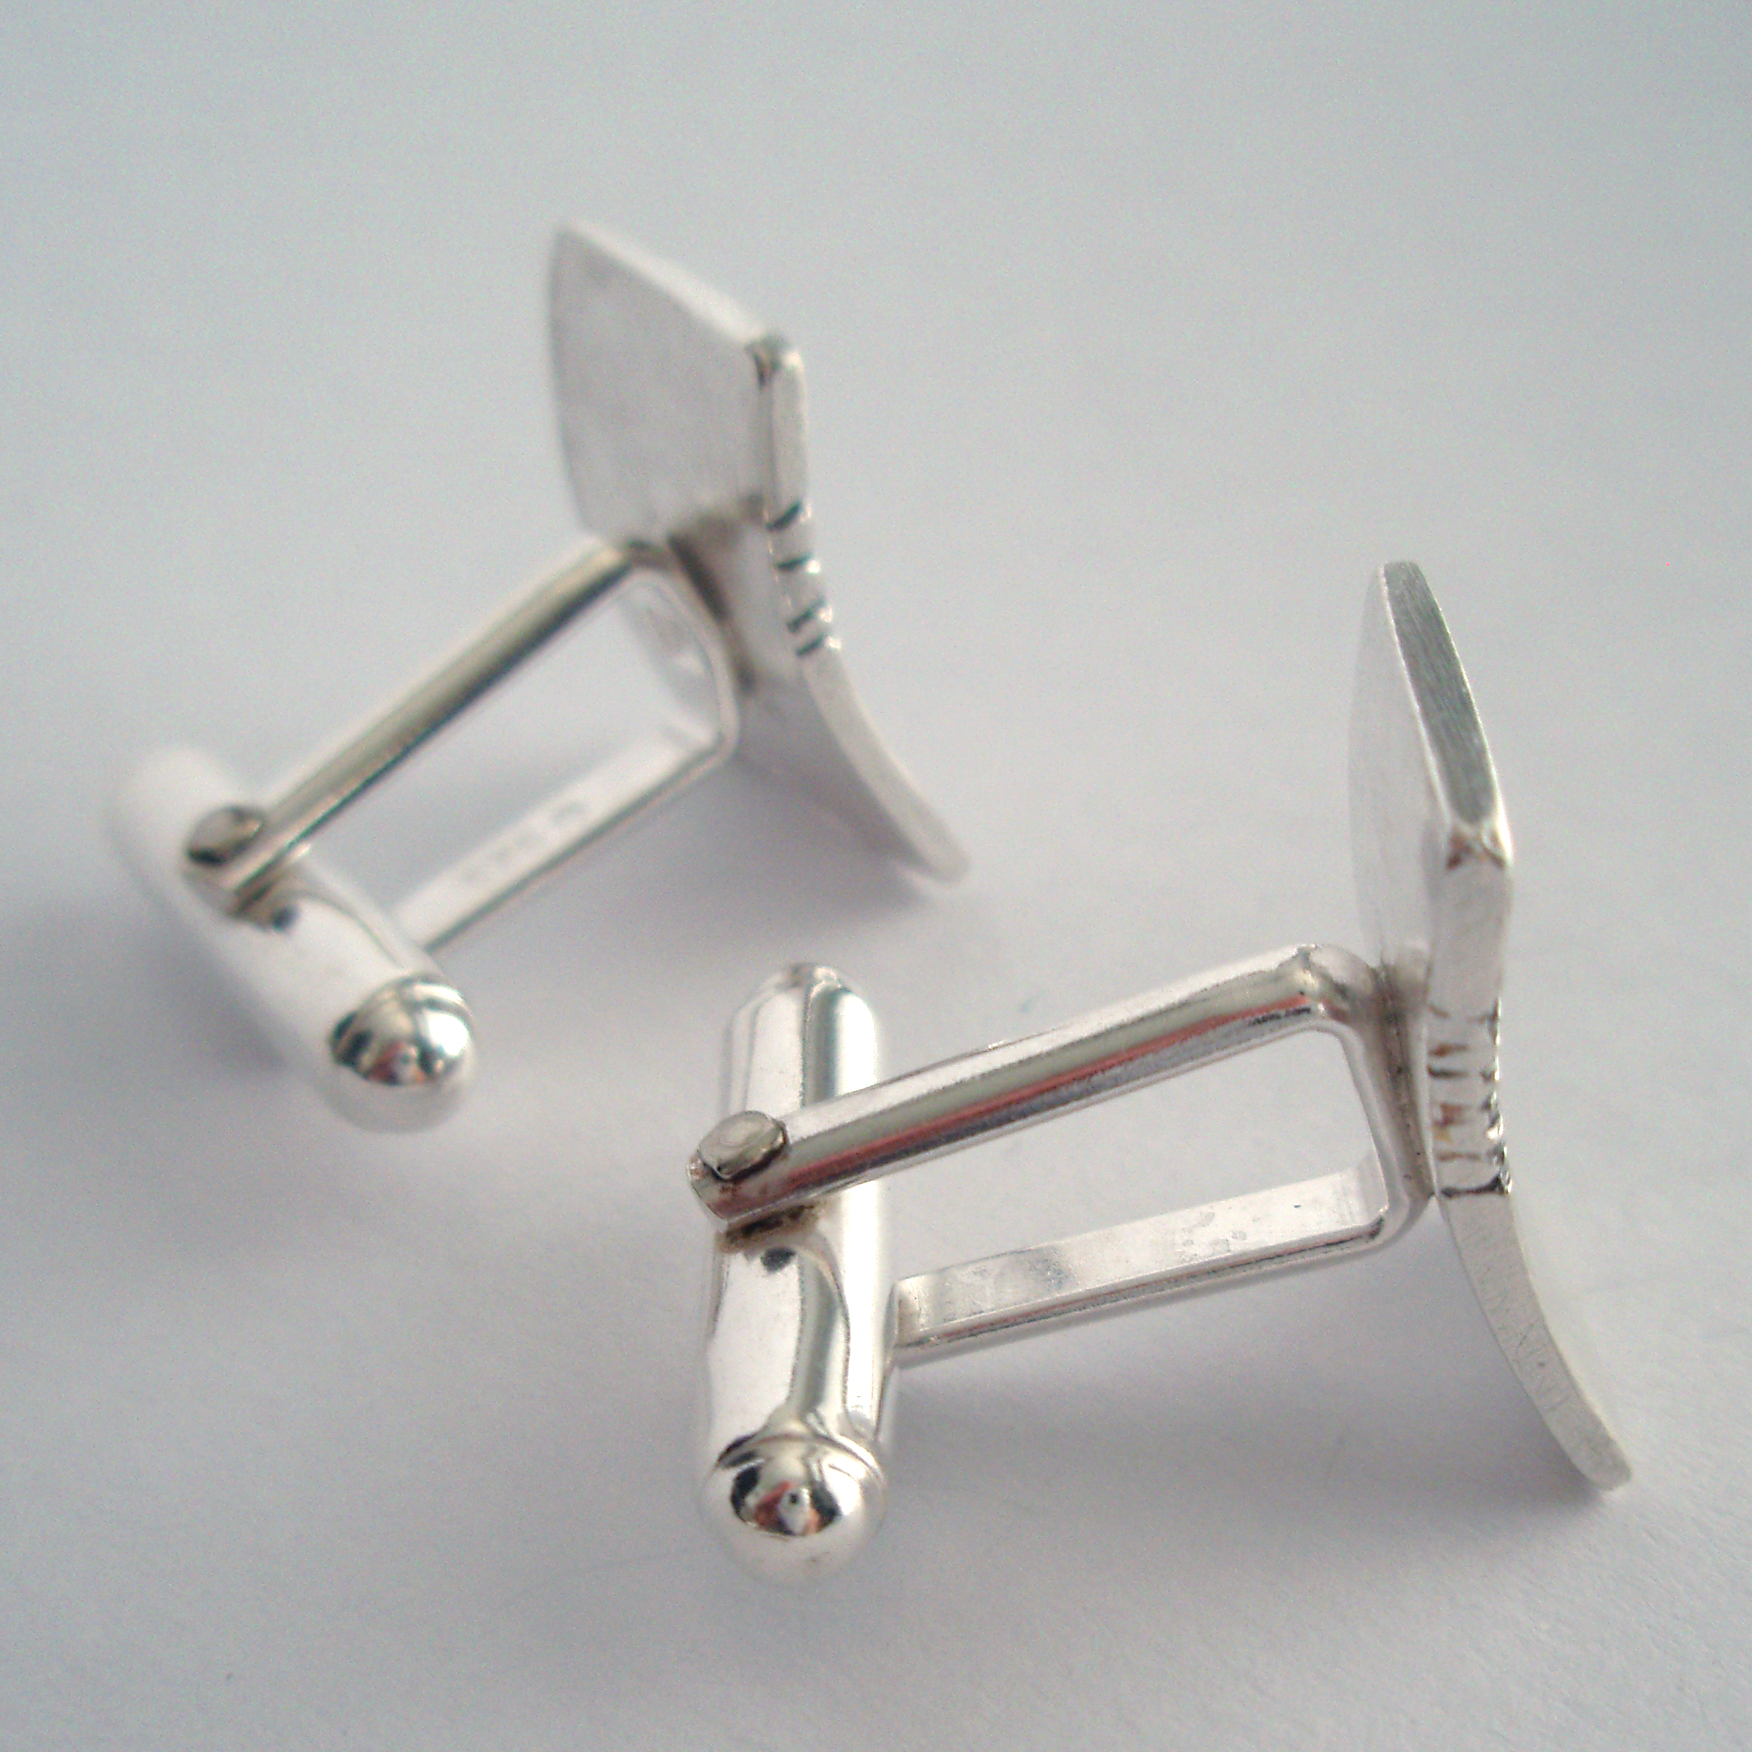 Etched silver cufflinks | Cufflinks by Kate Smith